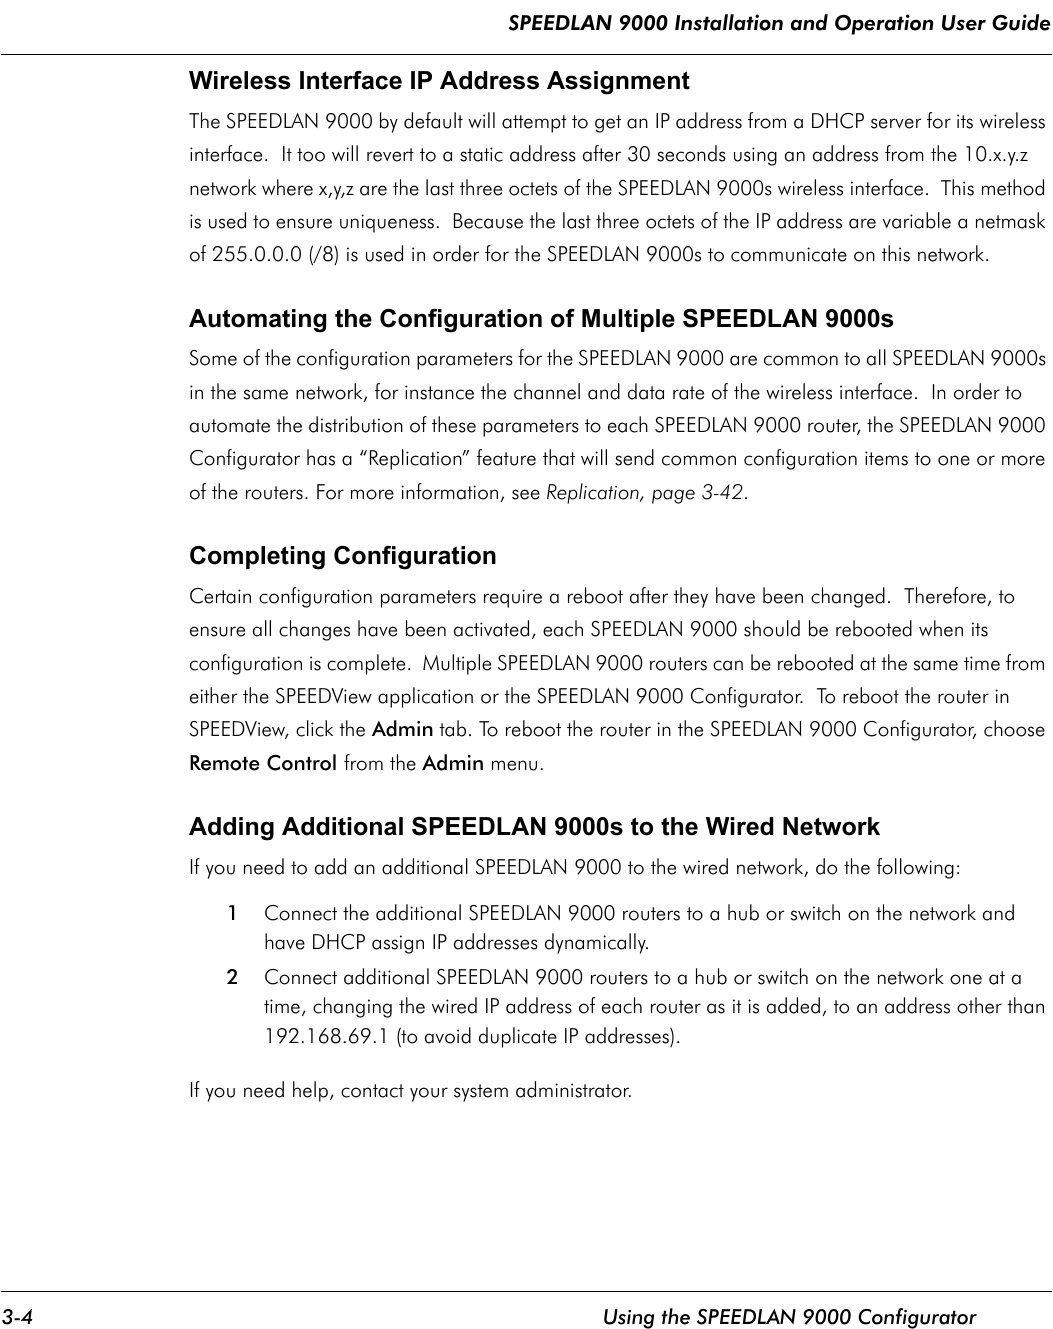 SPEEDLAN 9000 Installation and Operation User Guide 3-4 Using the SPEEDLAN 9000 ConfiguratorWireless Interface IP Address AssignmentThe SPEEDLAN 9000 by default will attempt to get an IP address from a DHCP server for its wireless interface.  It too will revert to a static address after 30 seconds using an address from the 10.x.y.z network where x,y,z are the last three octets of the SPEEDLAN 9000s wireless interface.  This method is used to ensure uniqueness.  Because the last three octets of the IP address are variable a netmask of 255.0.0.0 (/8) is used in order for the SPEEDLAN 9000s to communicate on this network.Automating the Configuration of Multiple SPEEDLAN 9000sSome of the configuration parameters for the SPEEDLAN 9000 are common to all SPEEDLAN 9000s in the same network, for instance the channel and data rate of the wireless interface.  In order to automate the distribution of these parameters to each SPEEDLAN 9000 router, the SPEEDLAN 9000 Configurator has a “Replication” feature that will send common configuration items to one or more of the routers. For more information, see Replication, page 3-42.Completing ConfigurationCertain configuration parameters require a reboot after they have been changed.  Therefore, to ensure all changes have been activated, each SPEEDLAN 9000 should be rebooted when its configuration is complete.  Multiple SPEEDLAN 9000 routers can be rebooted at the same time from either the SPEEDView application or the SPEEDLAN 9000 Configurator.  To reboot the router in SPEEDView, click the Admin tab. To reboot the router in the SPEEDLAN 9000 Configurator, choose Remote Control from the Admin menu.Adding Additional SPEEDLAN 9000s to the Wired NetworkIf you need to add an additional SPEEDLAN 9000 to the wired network, do the following:1Connect the additional SPEEDLAN 9000 routers to a hub or switch on the network and have DHCP assign IP addresses dynamically. 2Connect additional SPEEDLAN 9000 routers to a hub or switch on the network one at a time, changing the wired IP address of each router as it is added, to an address other than 192.168.69.1 (to avoid duplicate IP addresses). If you need help, contact your system administrator.